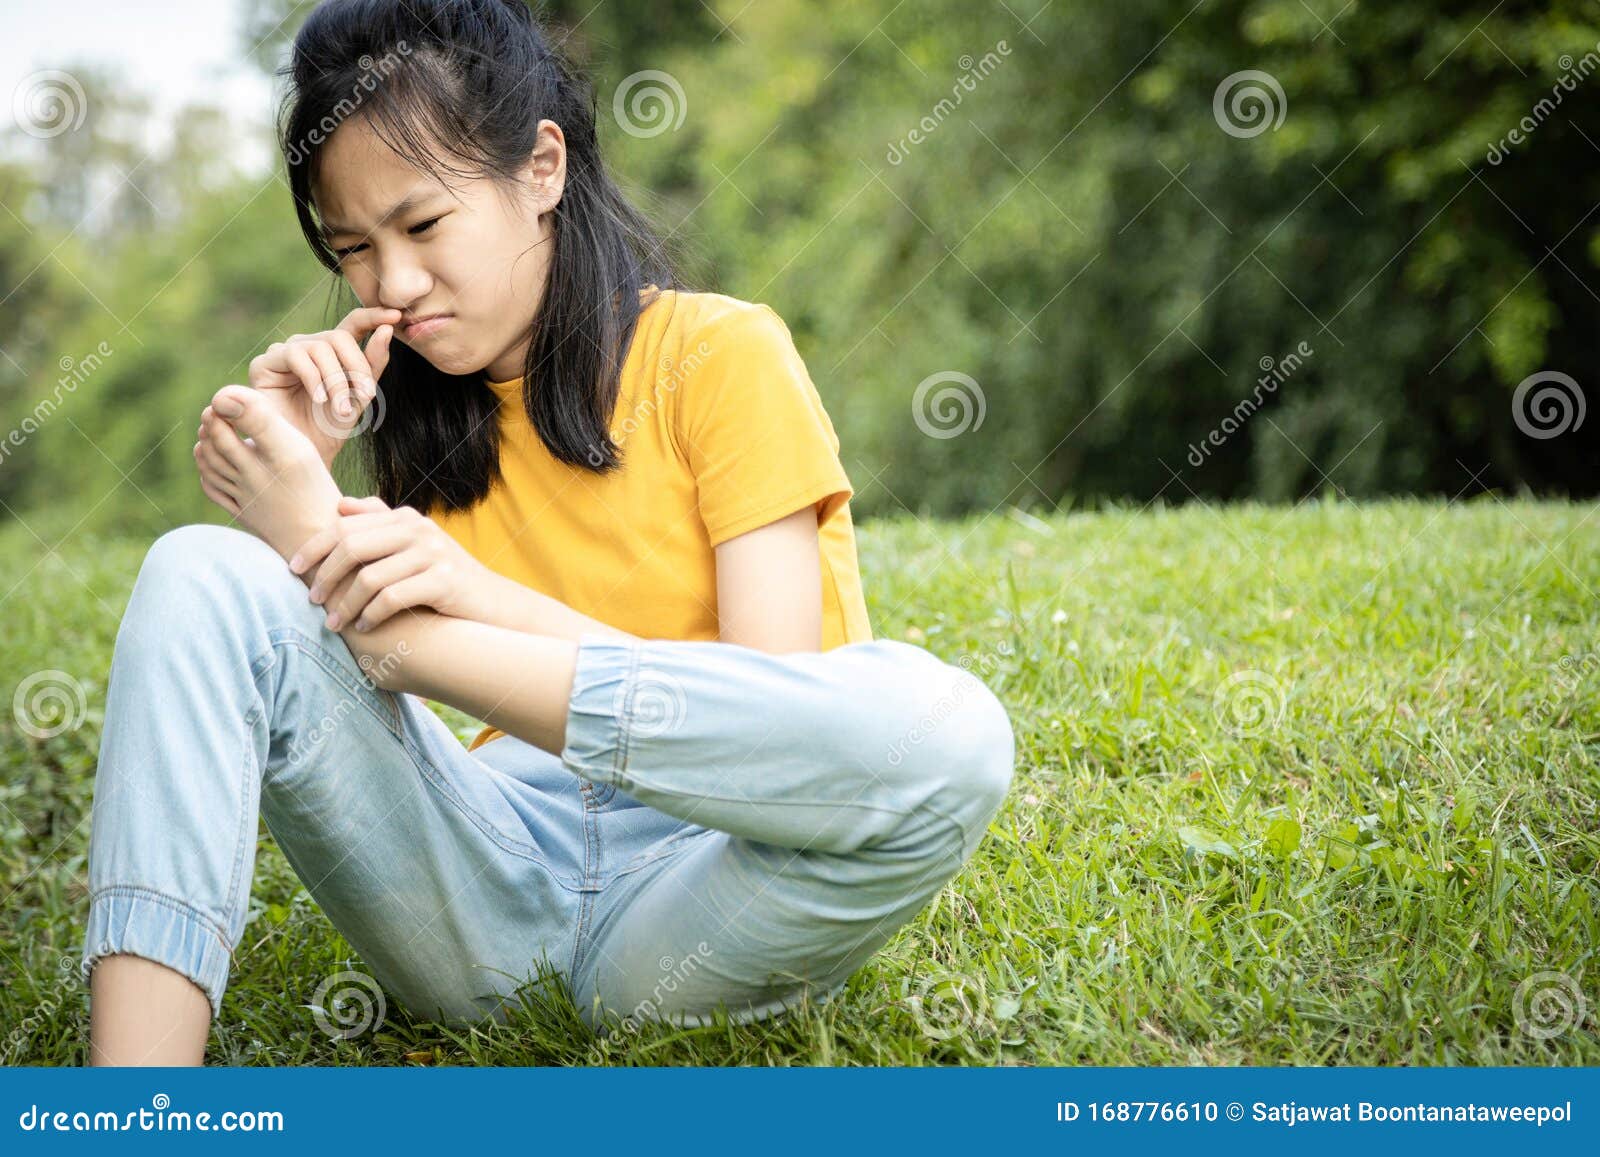 Legal Age Teenager foot sniffing